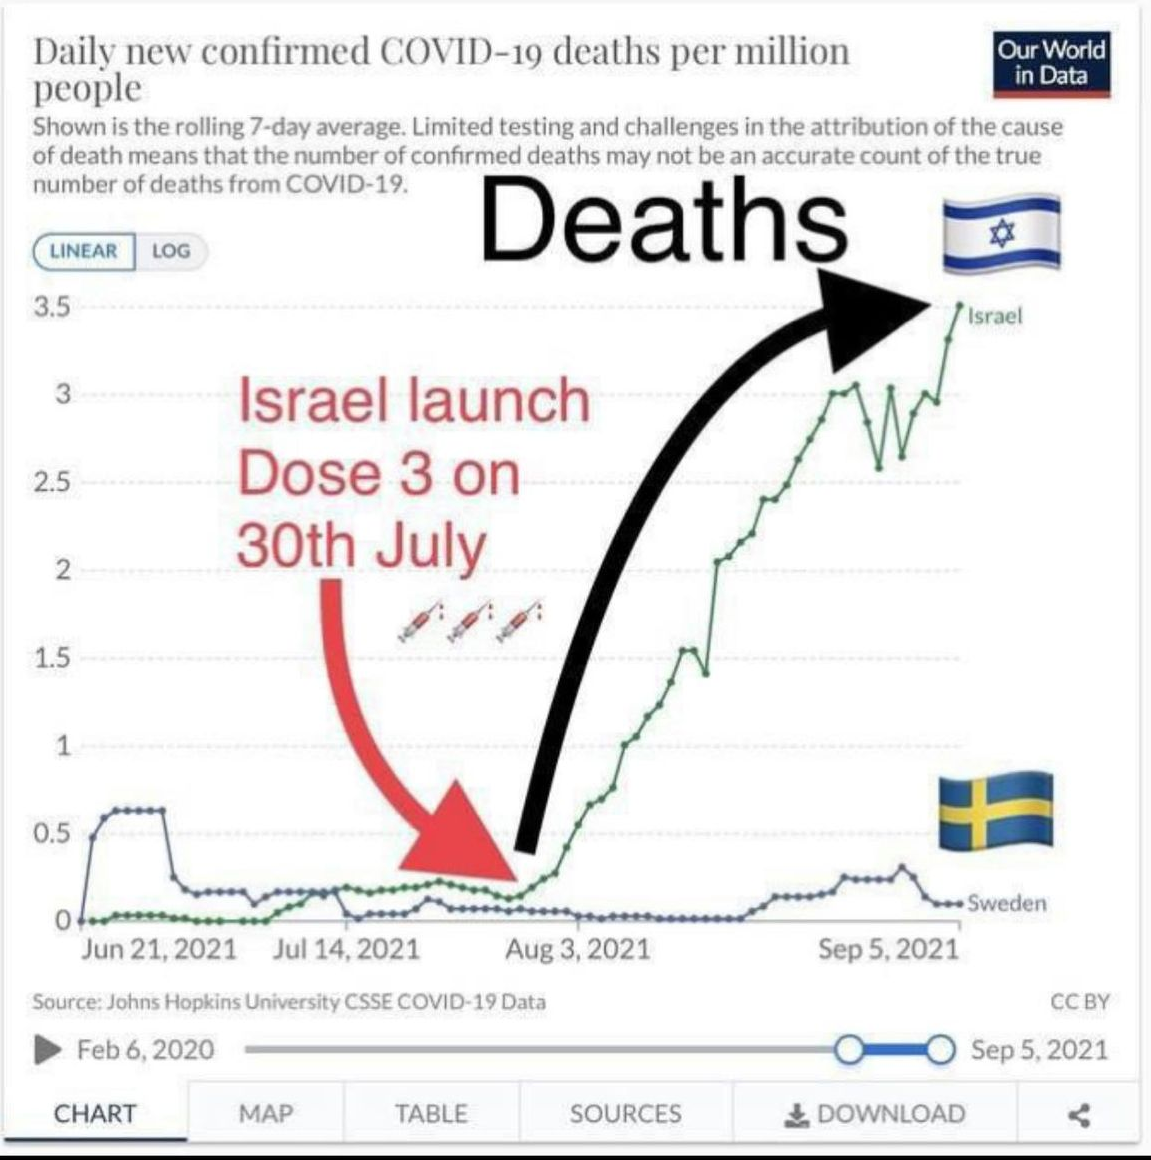 Israel Covid Deaths AFTER Dose 3